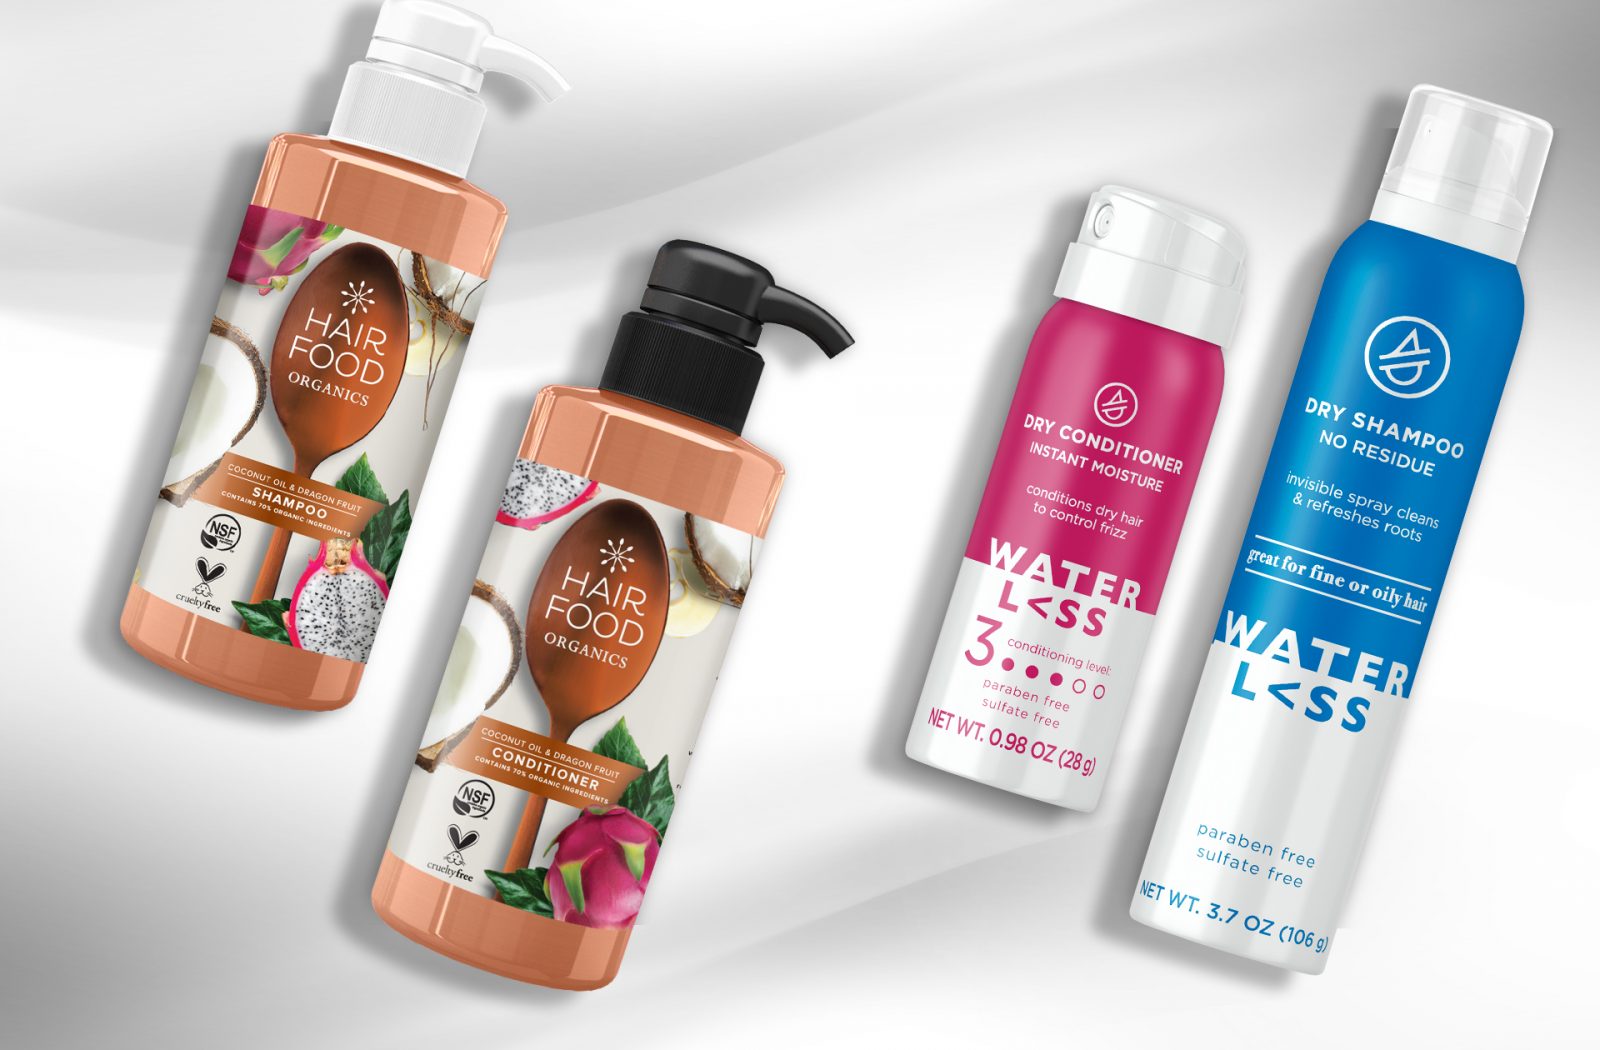 Render of two different Hair food organics and two different waterless hair care products, showcasing packs created by a cpg packaging design agency.